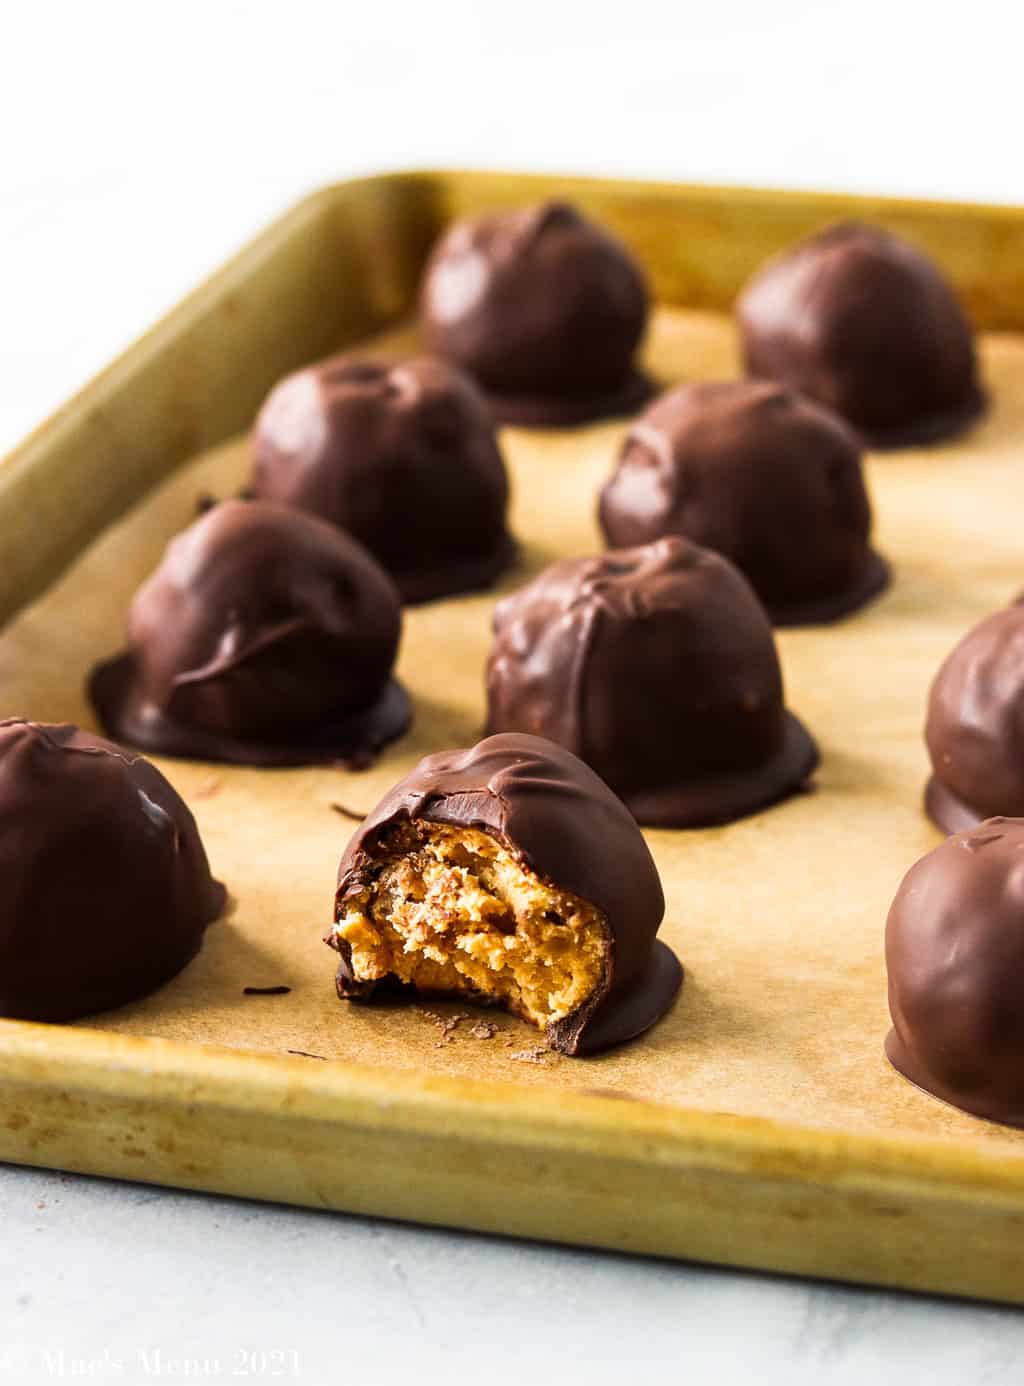 A side shot of a peanut butter bon bon with a bite taken out of it on a baking sheet with other bon bons